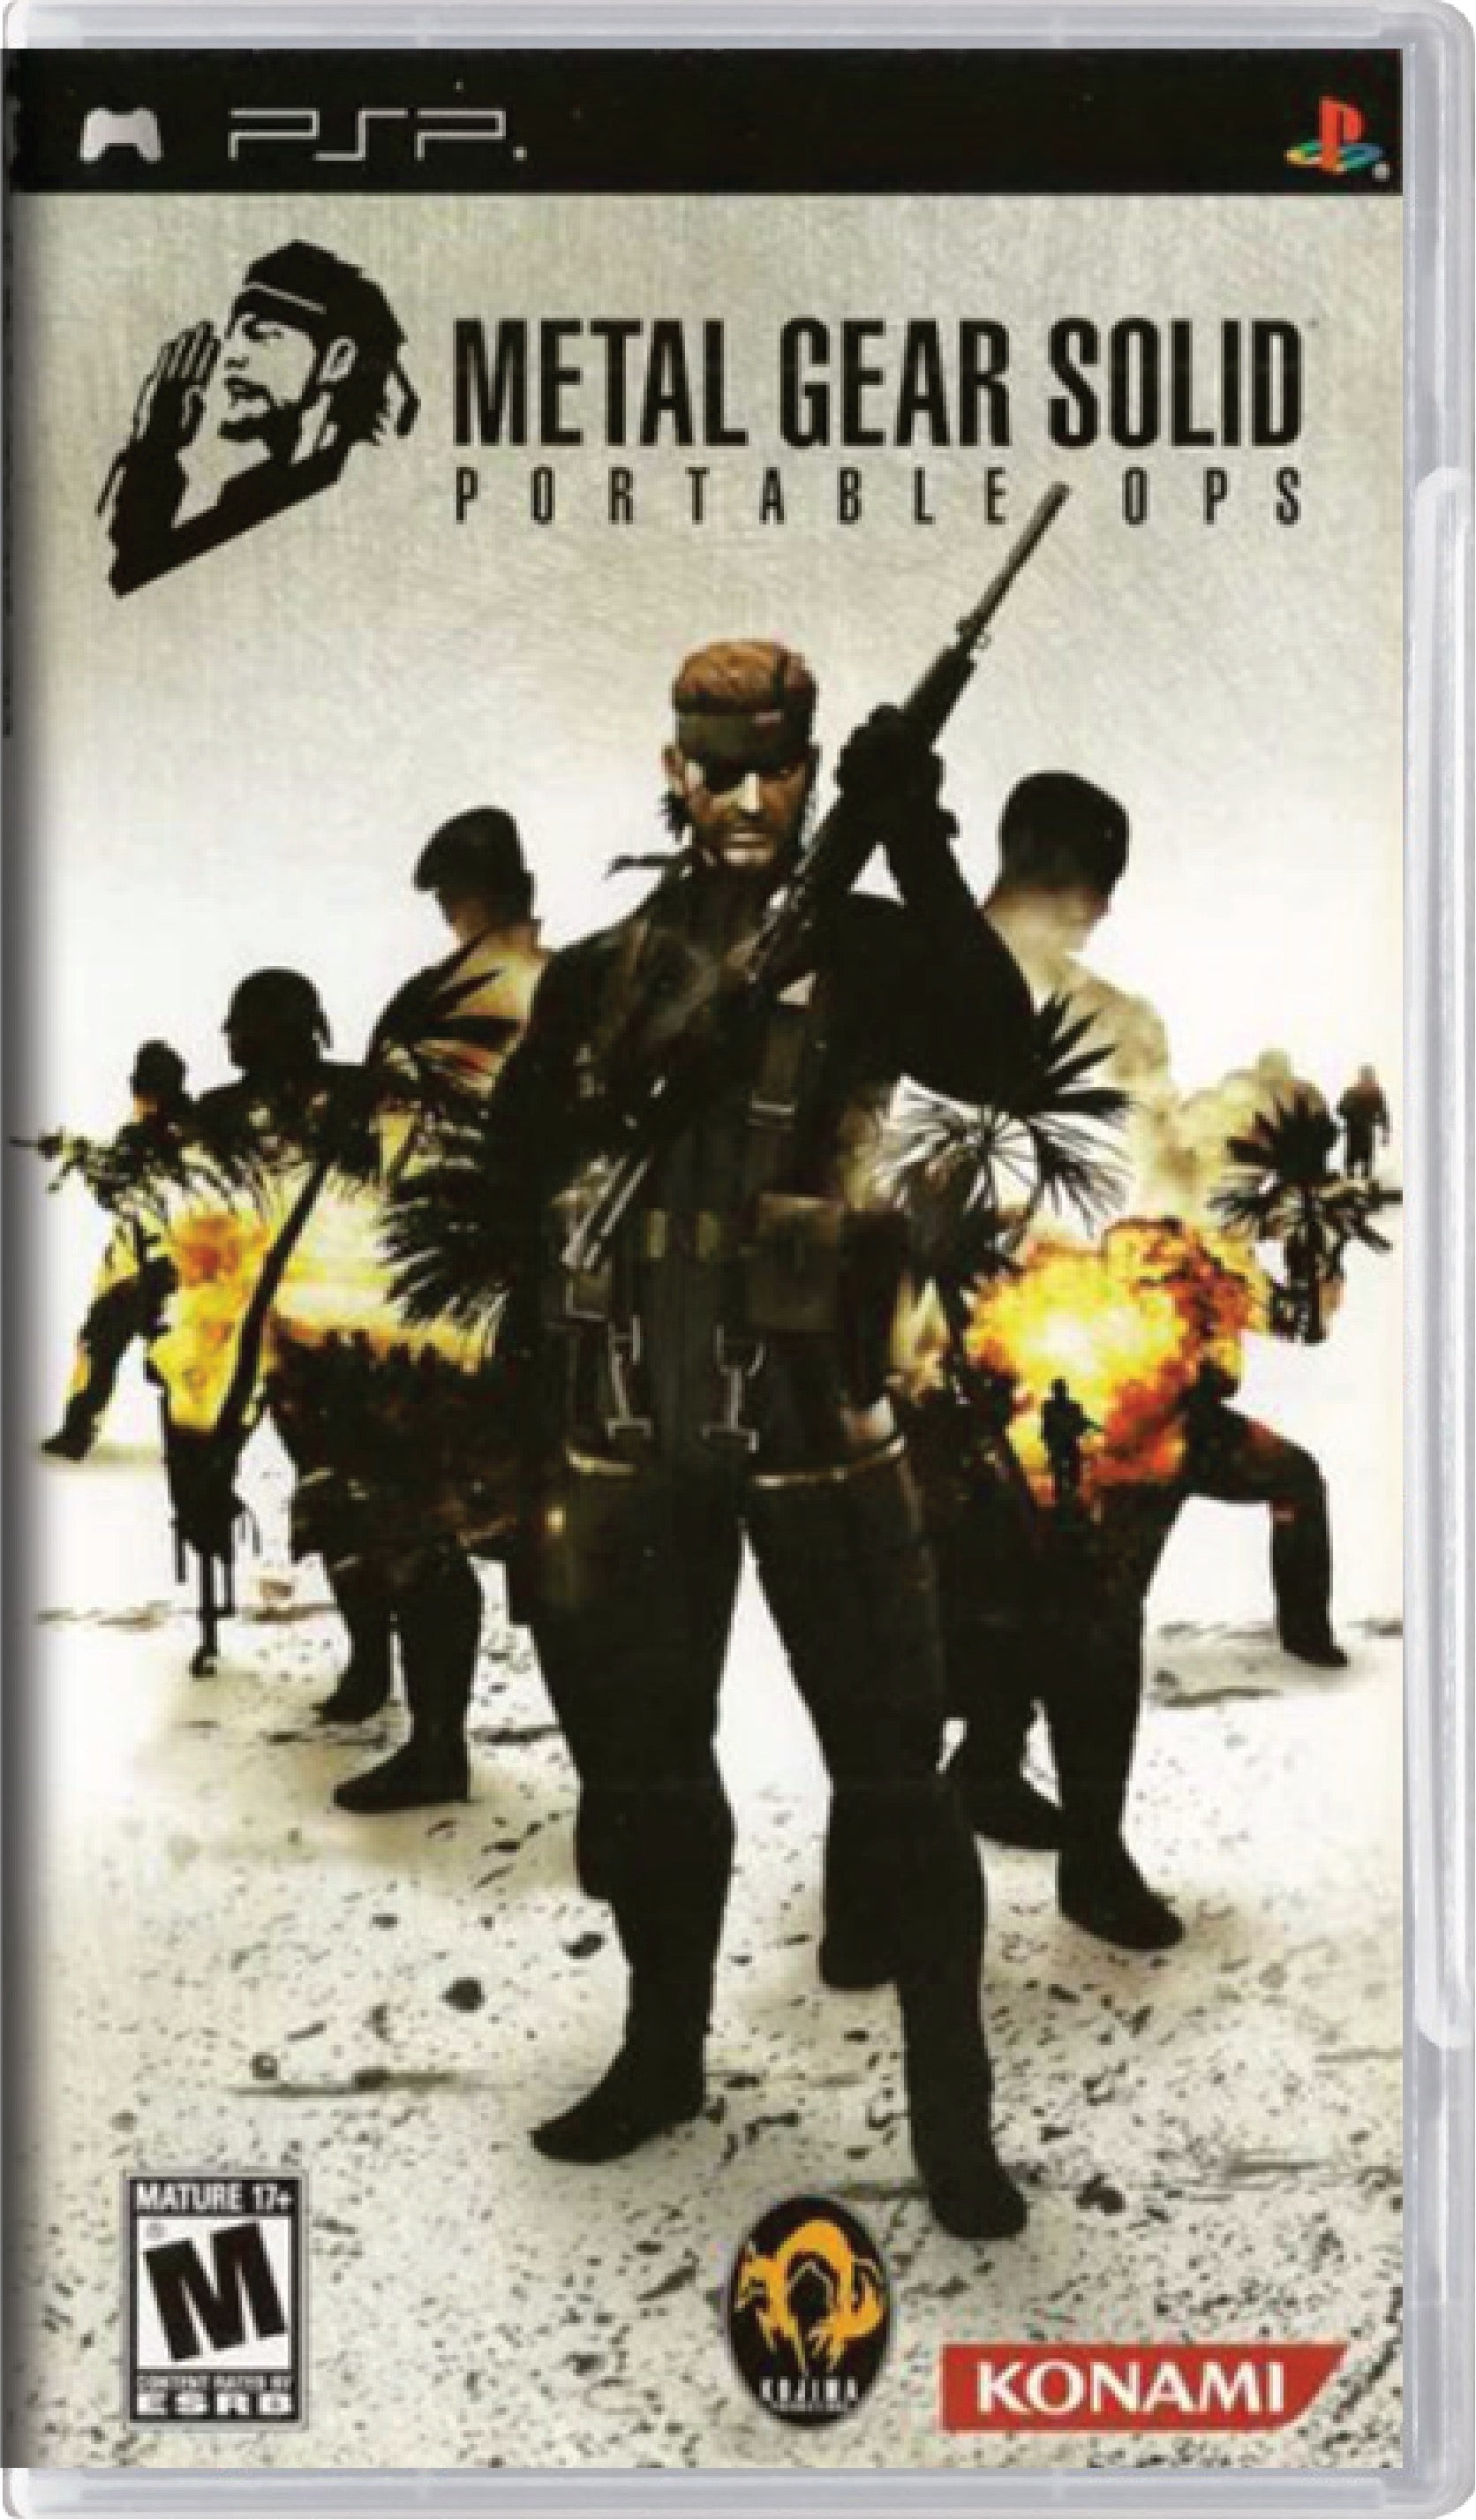 Metal Gear Solid Portable Ops Cover Art